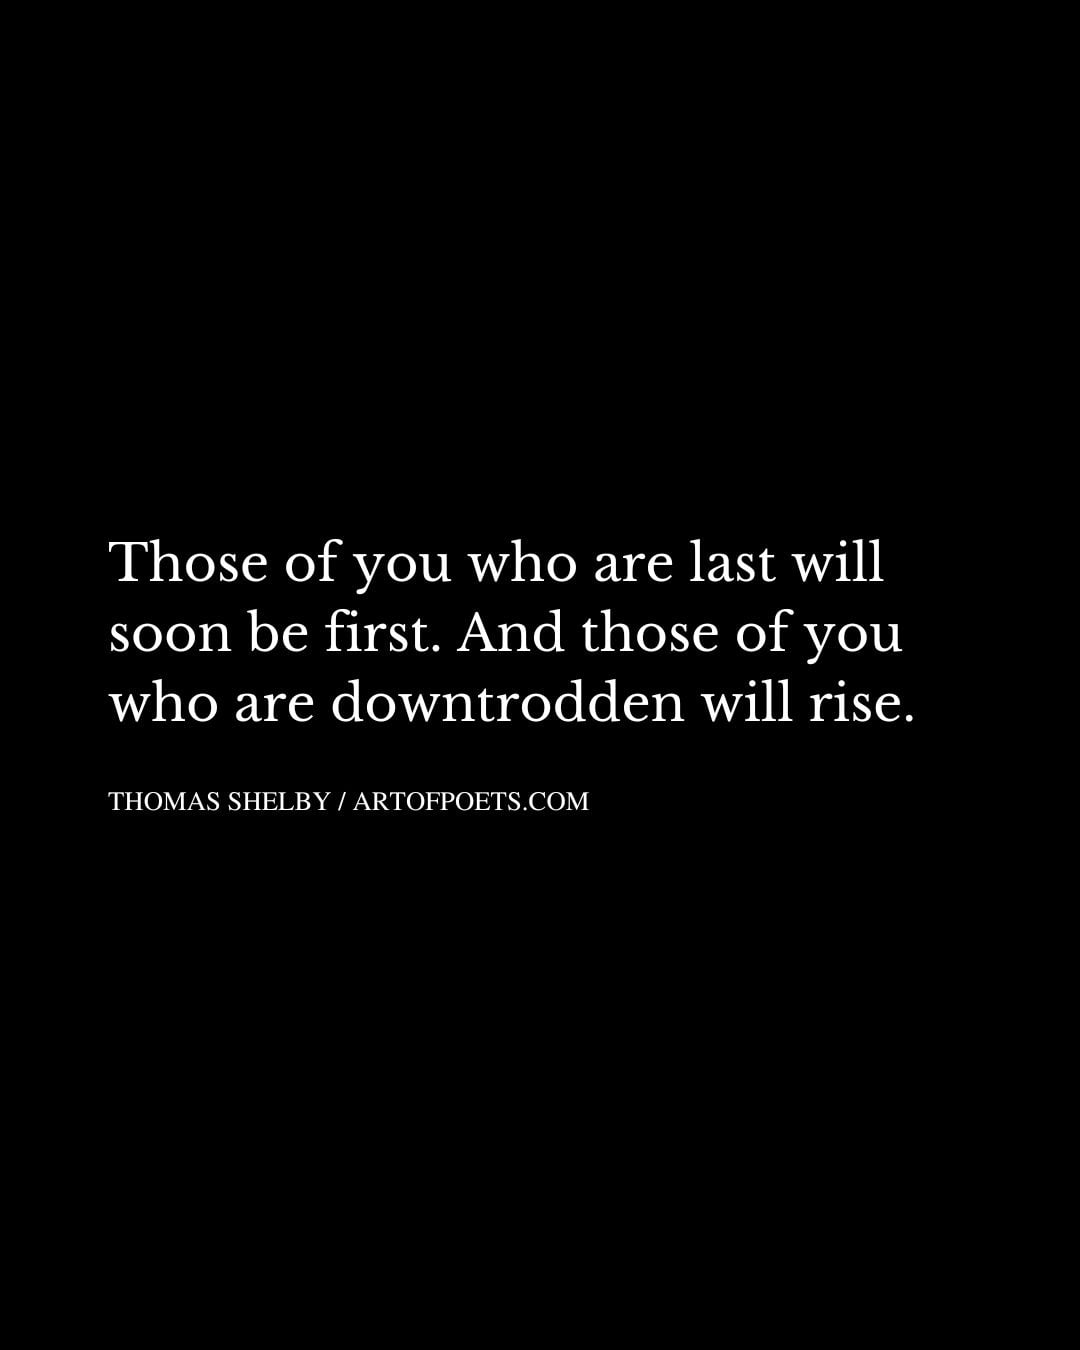 Those of you who are last will soon be first. And those of you who are downtrodden will rise